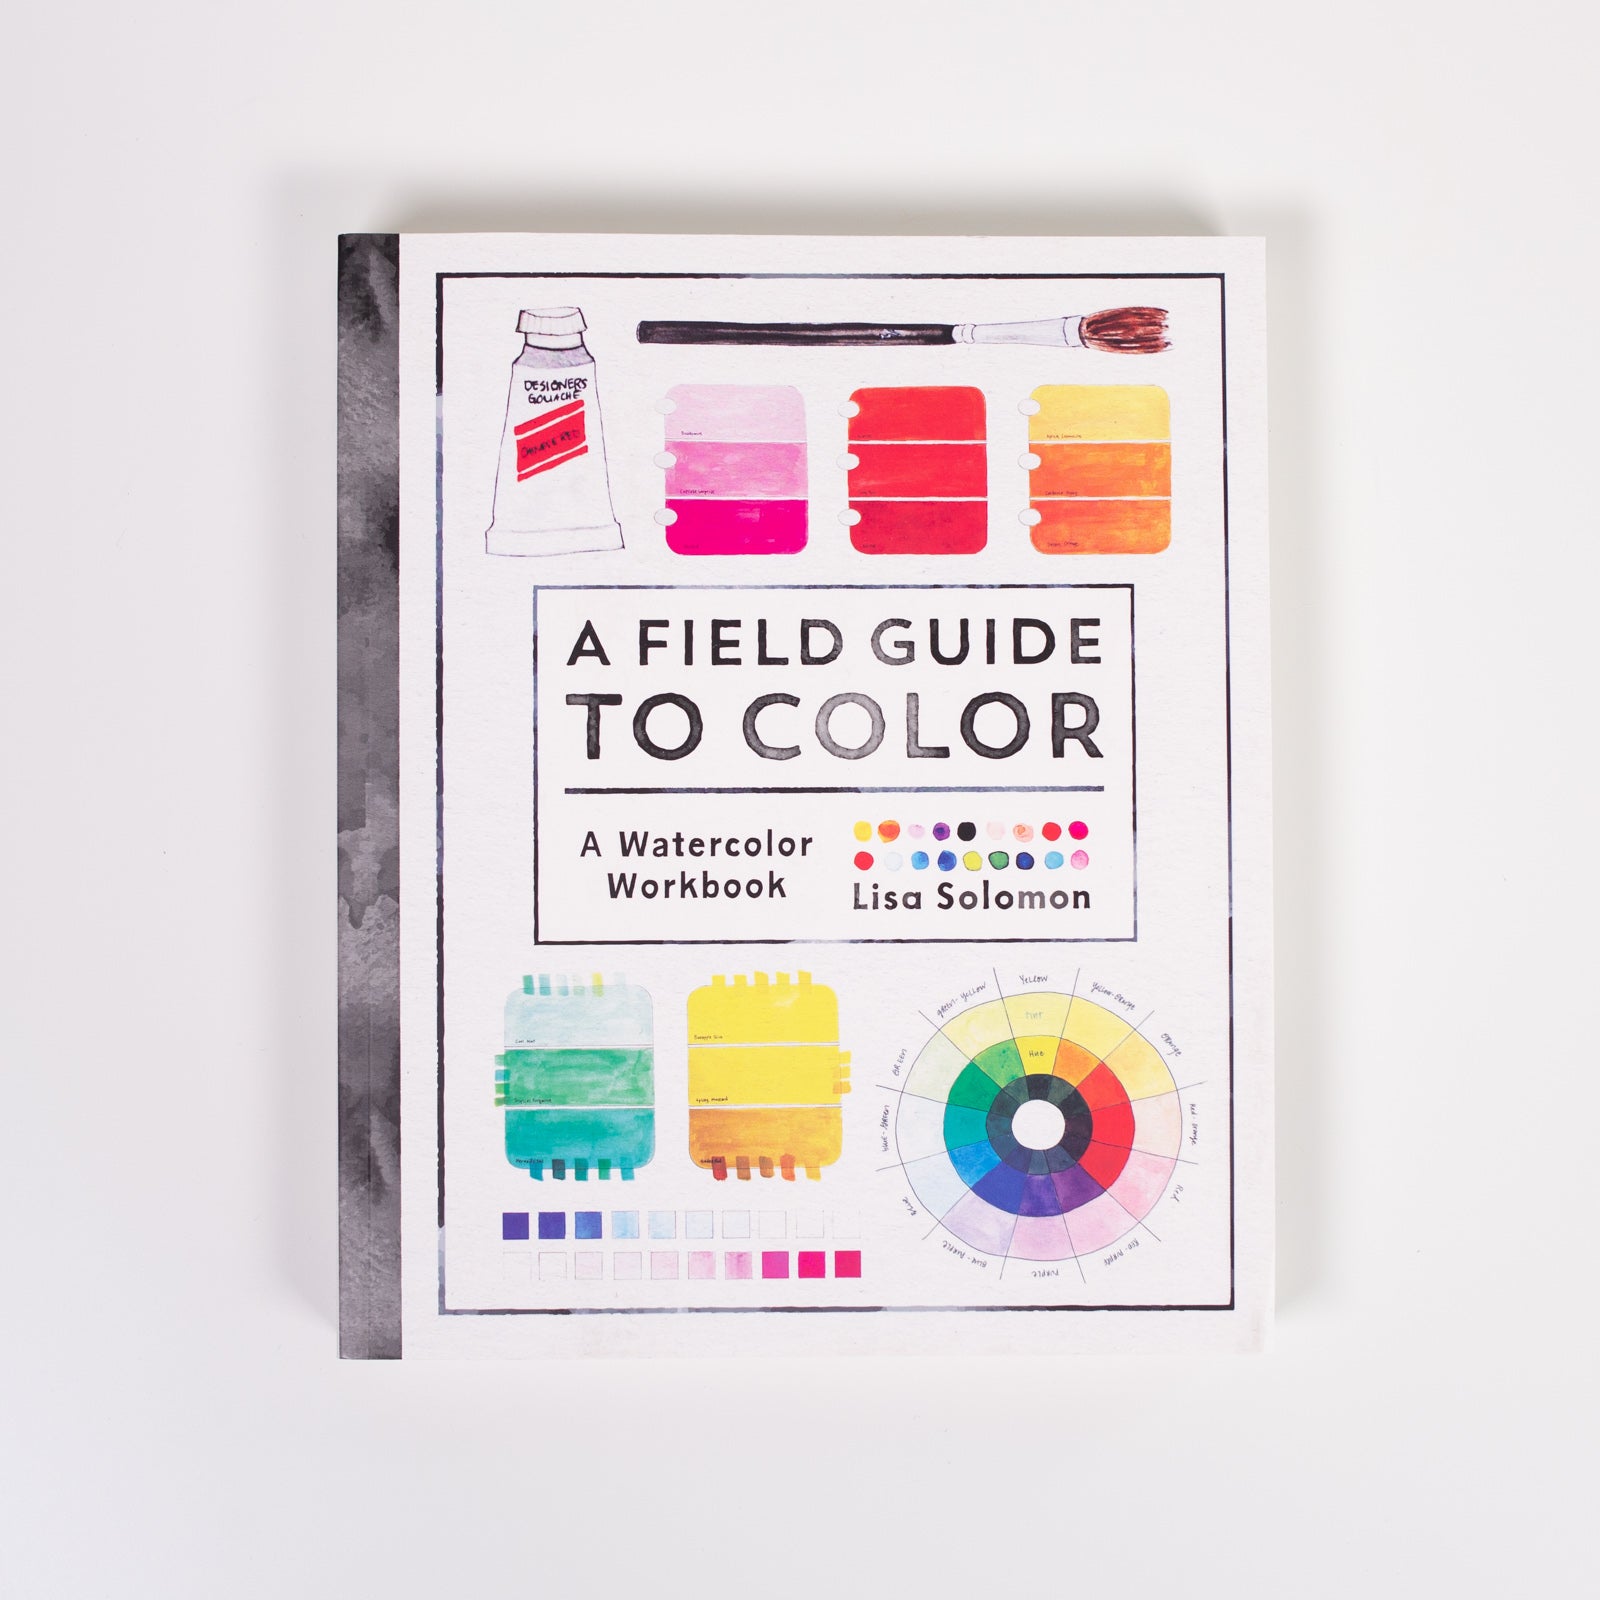 'A Field Guide to Color' by Lisa Solomon